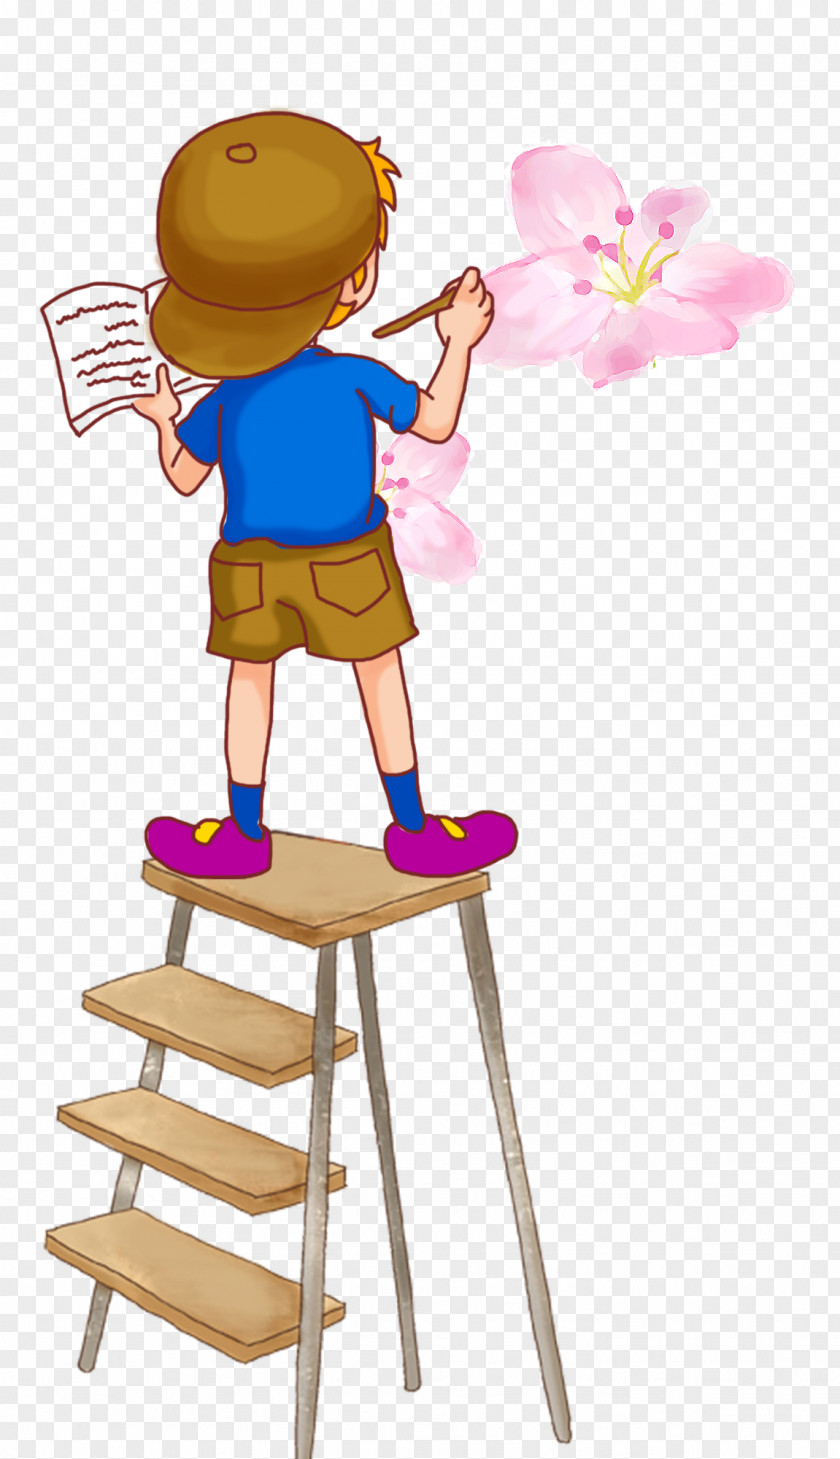 A Cartoon Boy Standing On Ladder Drawing Painting Illustration PNG